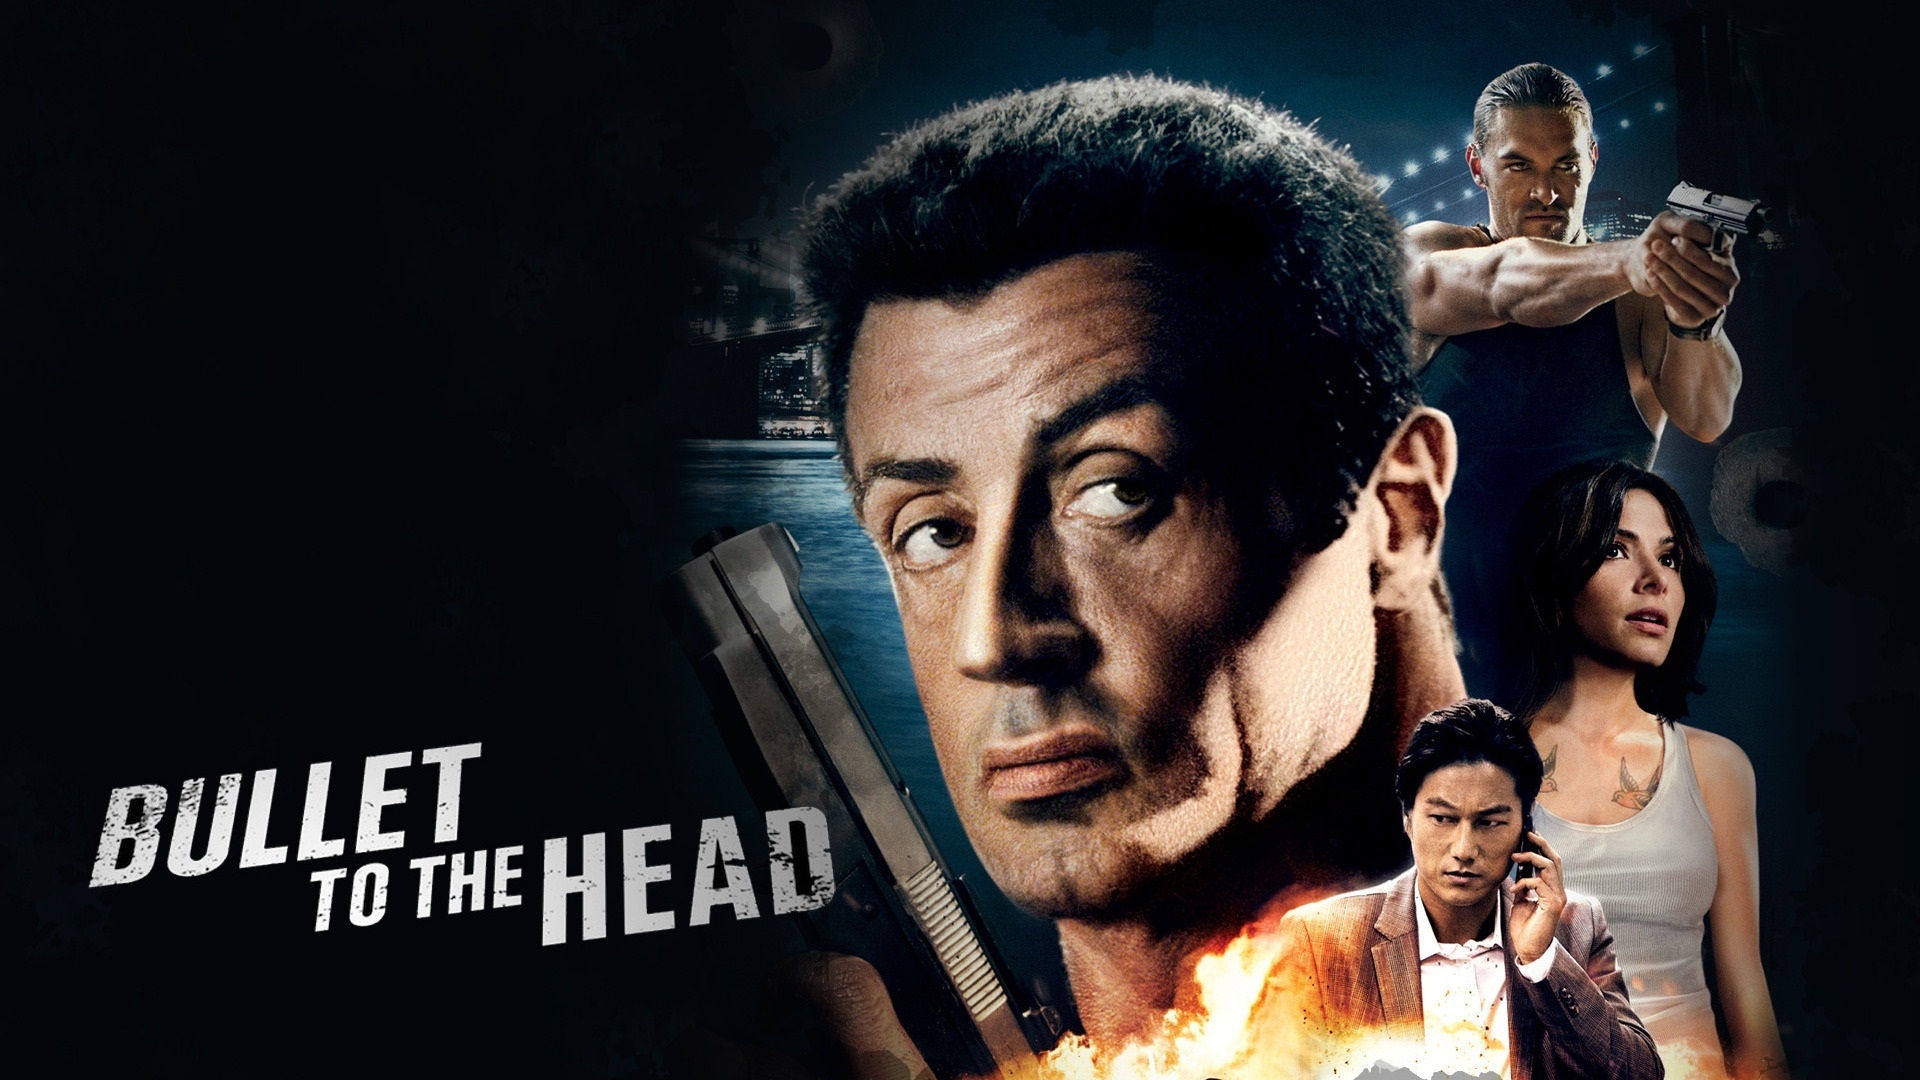 2013 Bullet to the Head for 1920 x 1080 HDTV 1080p resolution